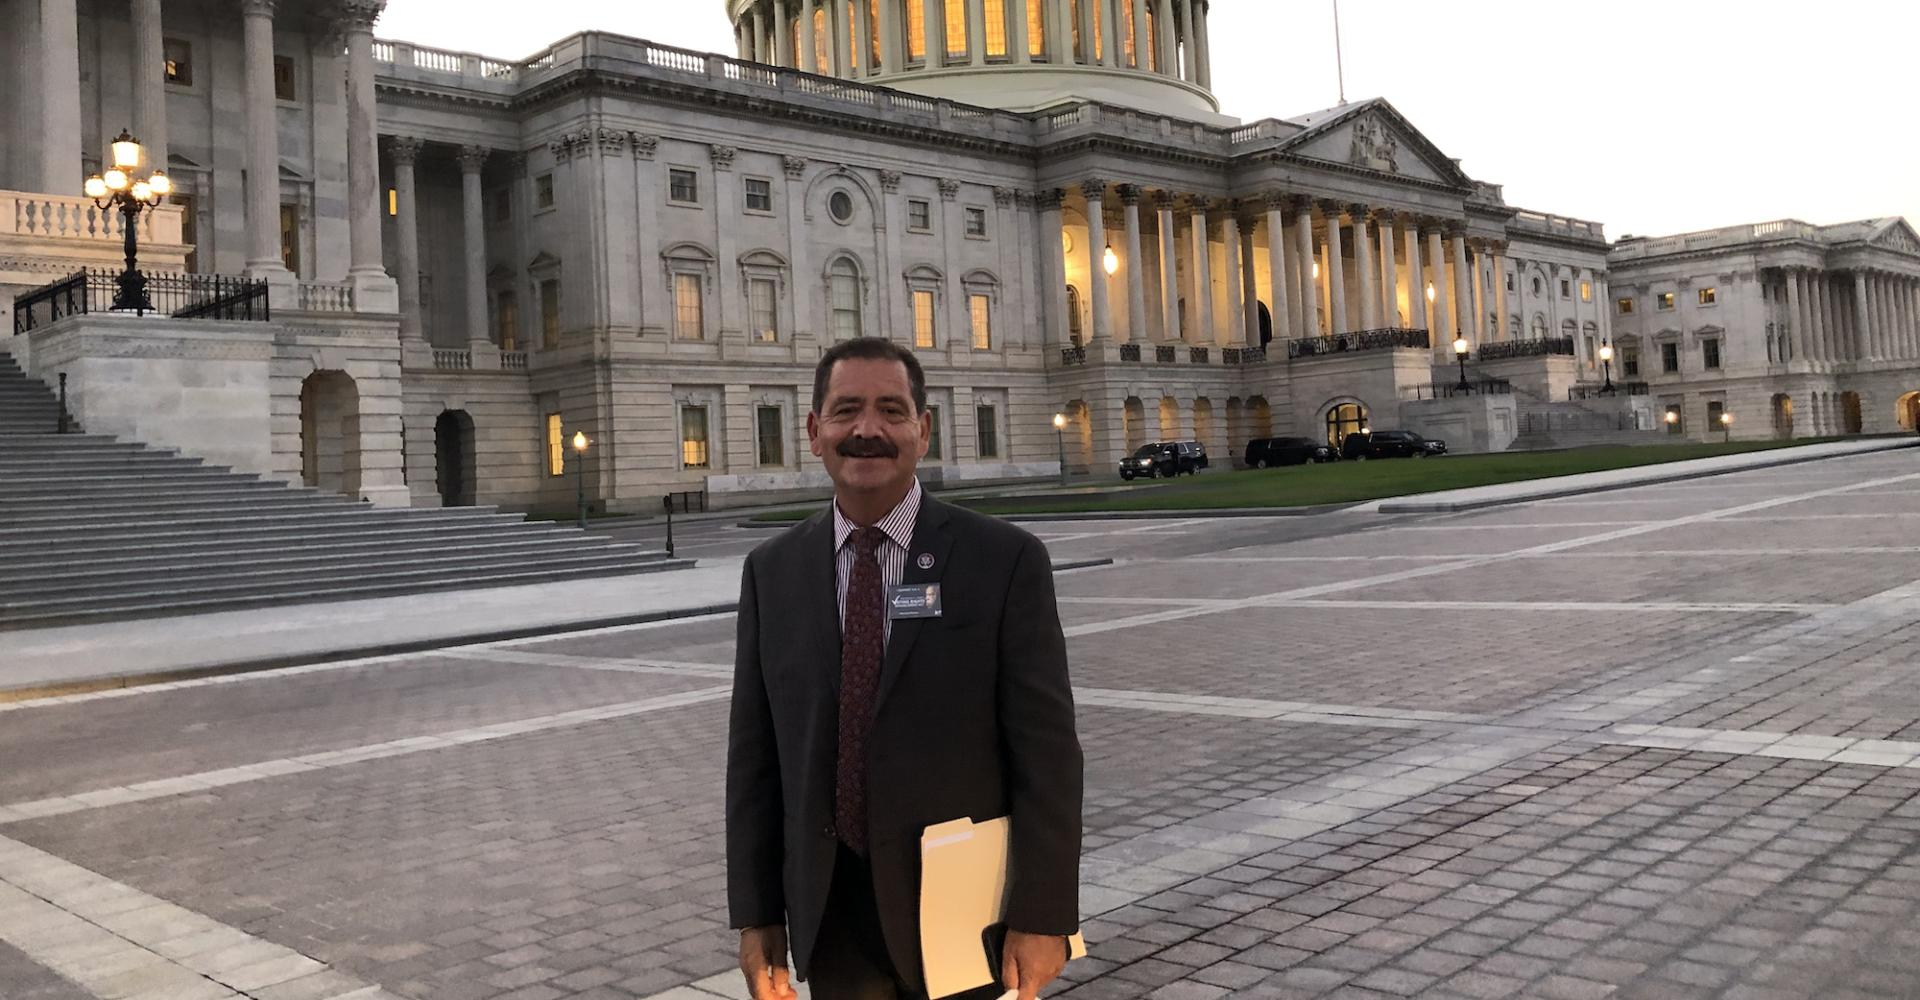 Representative Chuy Garcia in front of Capitol